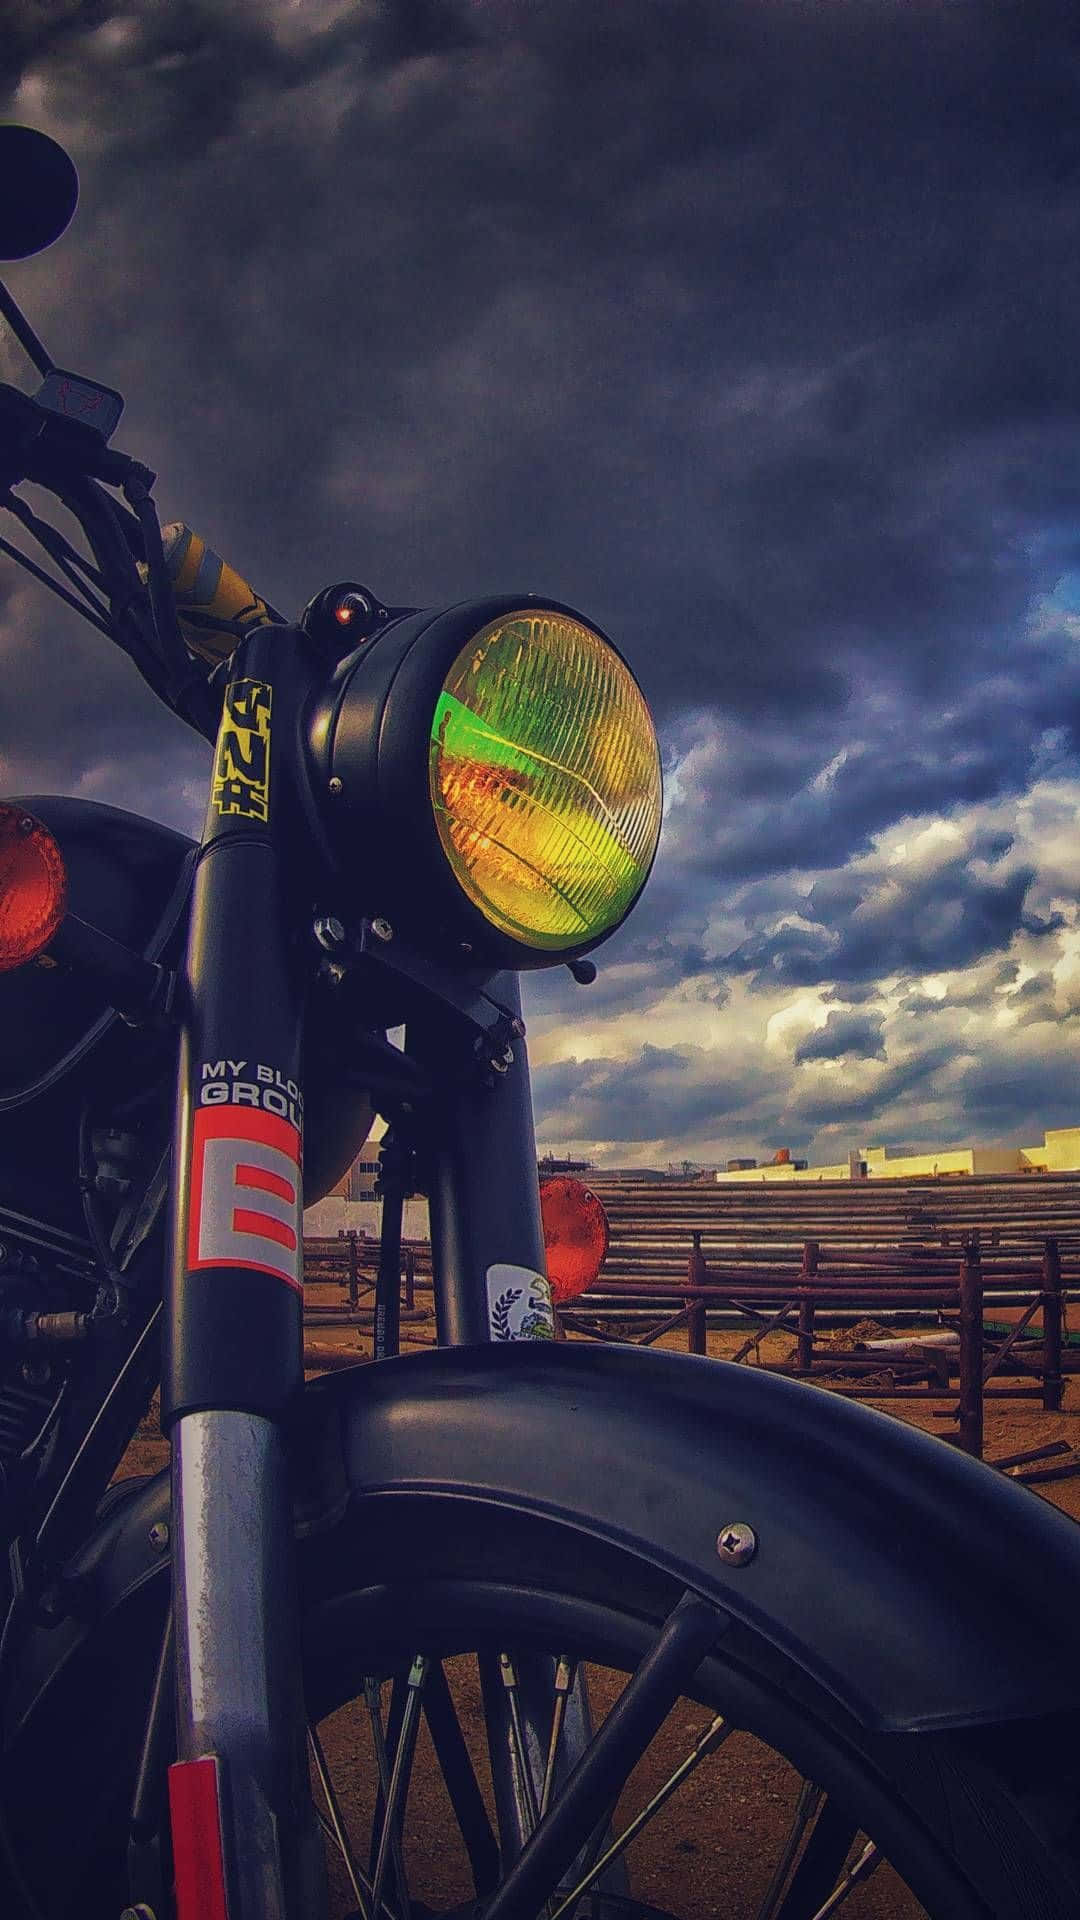 Take the open road with Royal Enfield Bullet